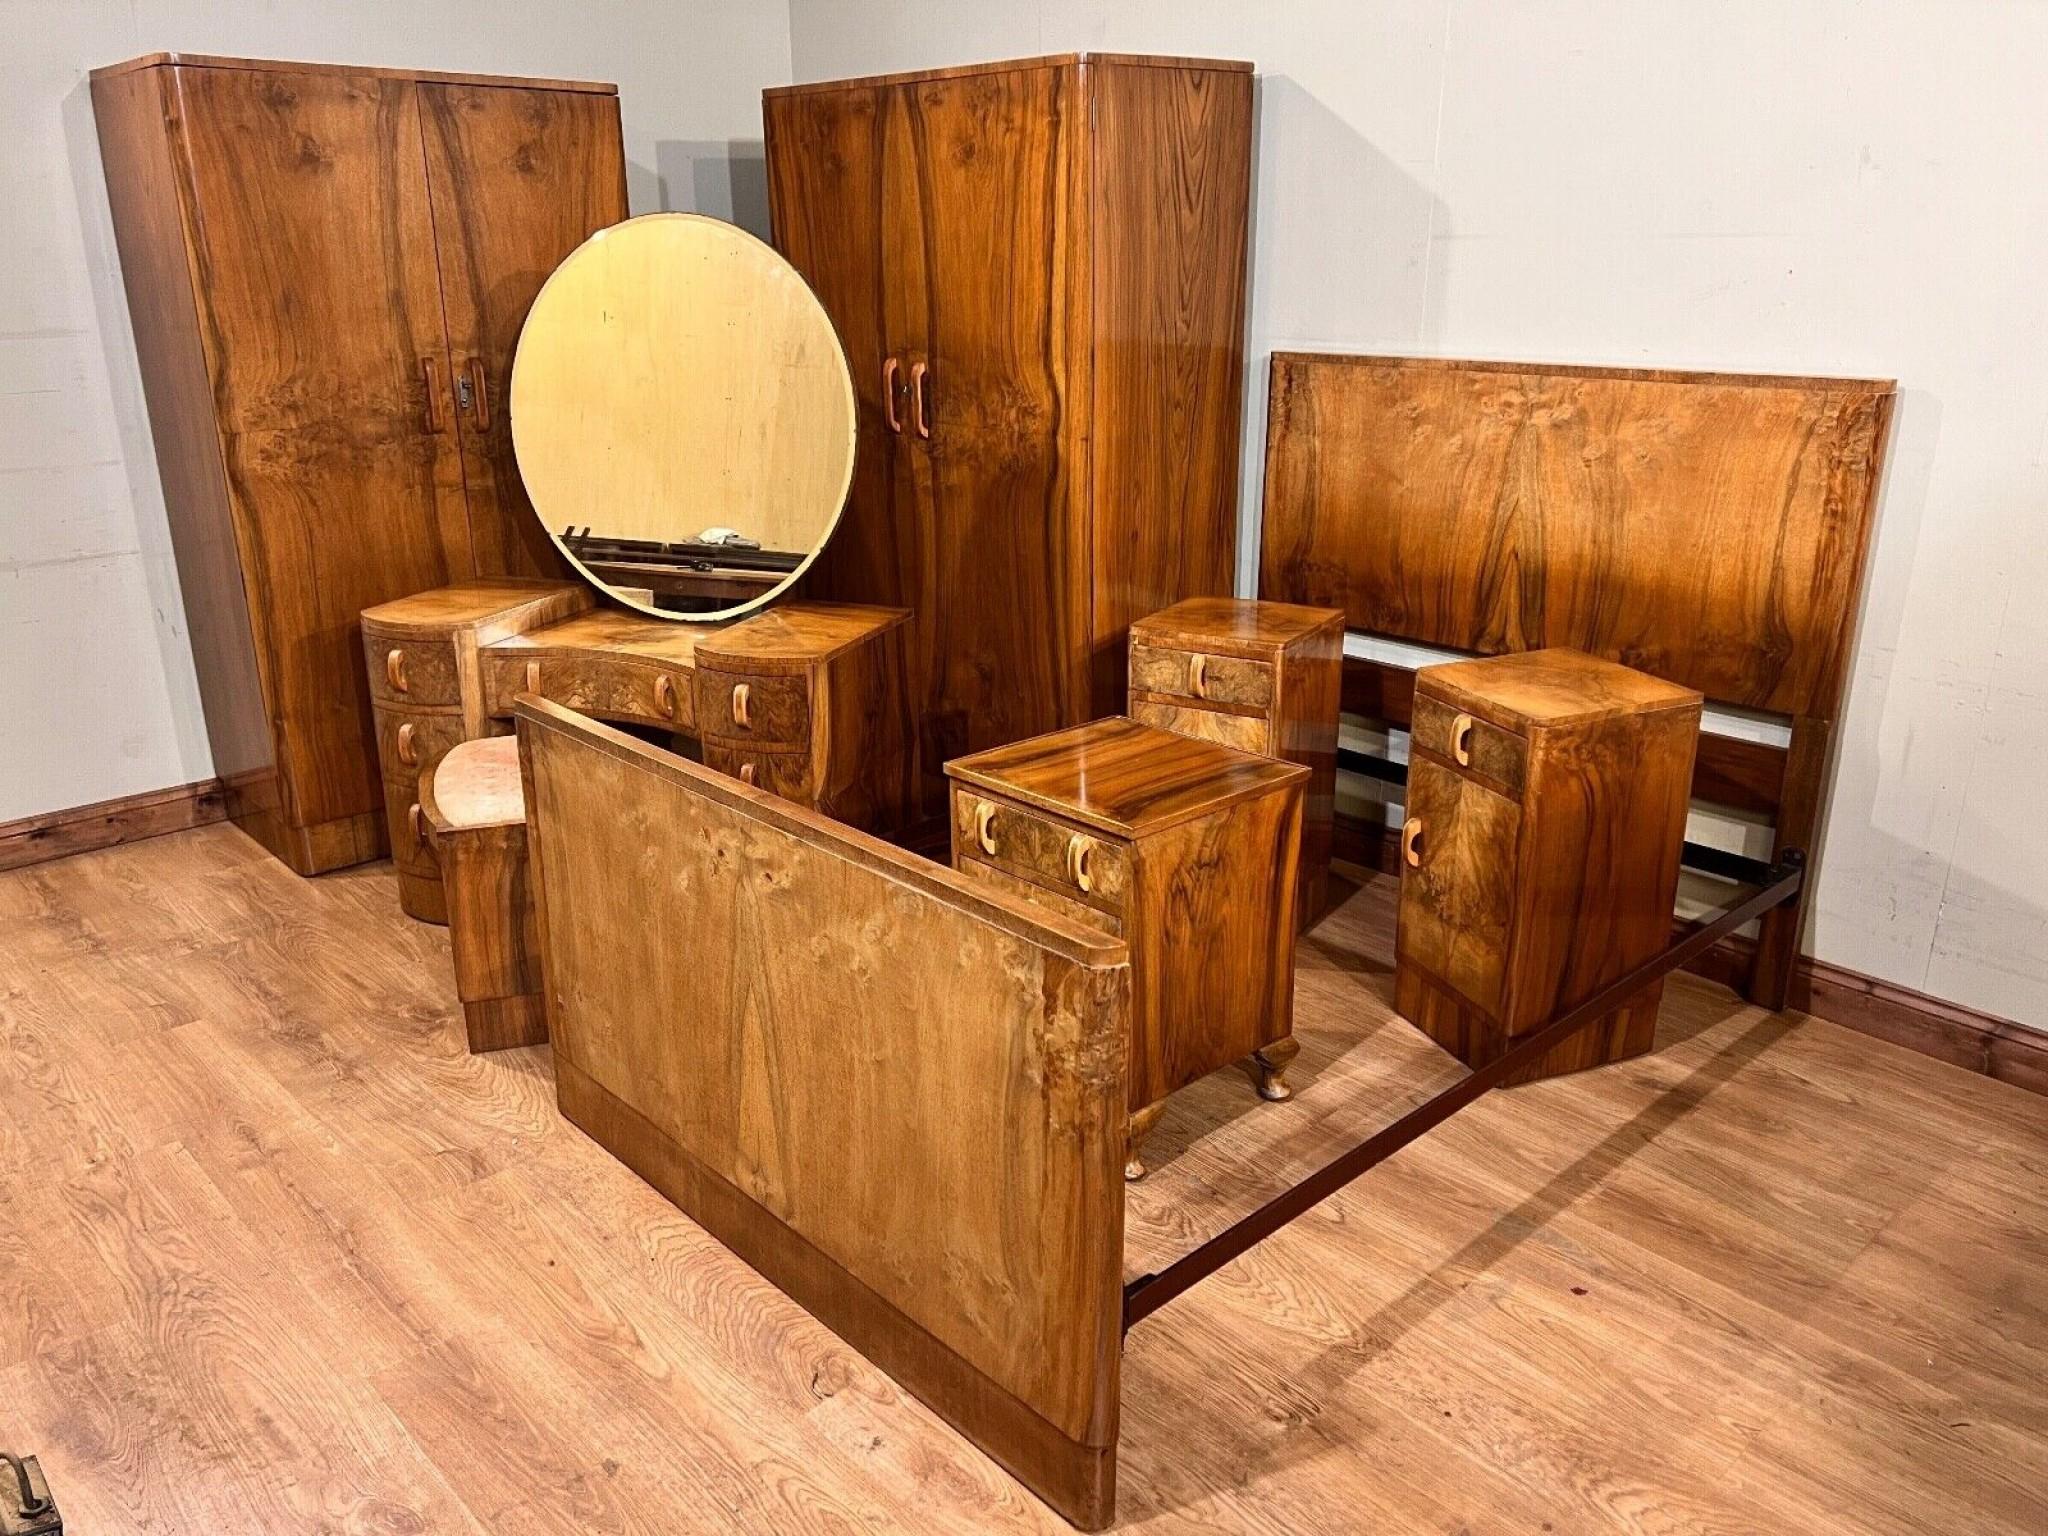 Absolutely stunning period art deco bedroom suite
Set consists of two wardrobes, a dresser, bedside tables, bed, stool and a pot cupboard
So great this vintage set is intact
Classic art deco look, very clean and minimal design
We have a whole range